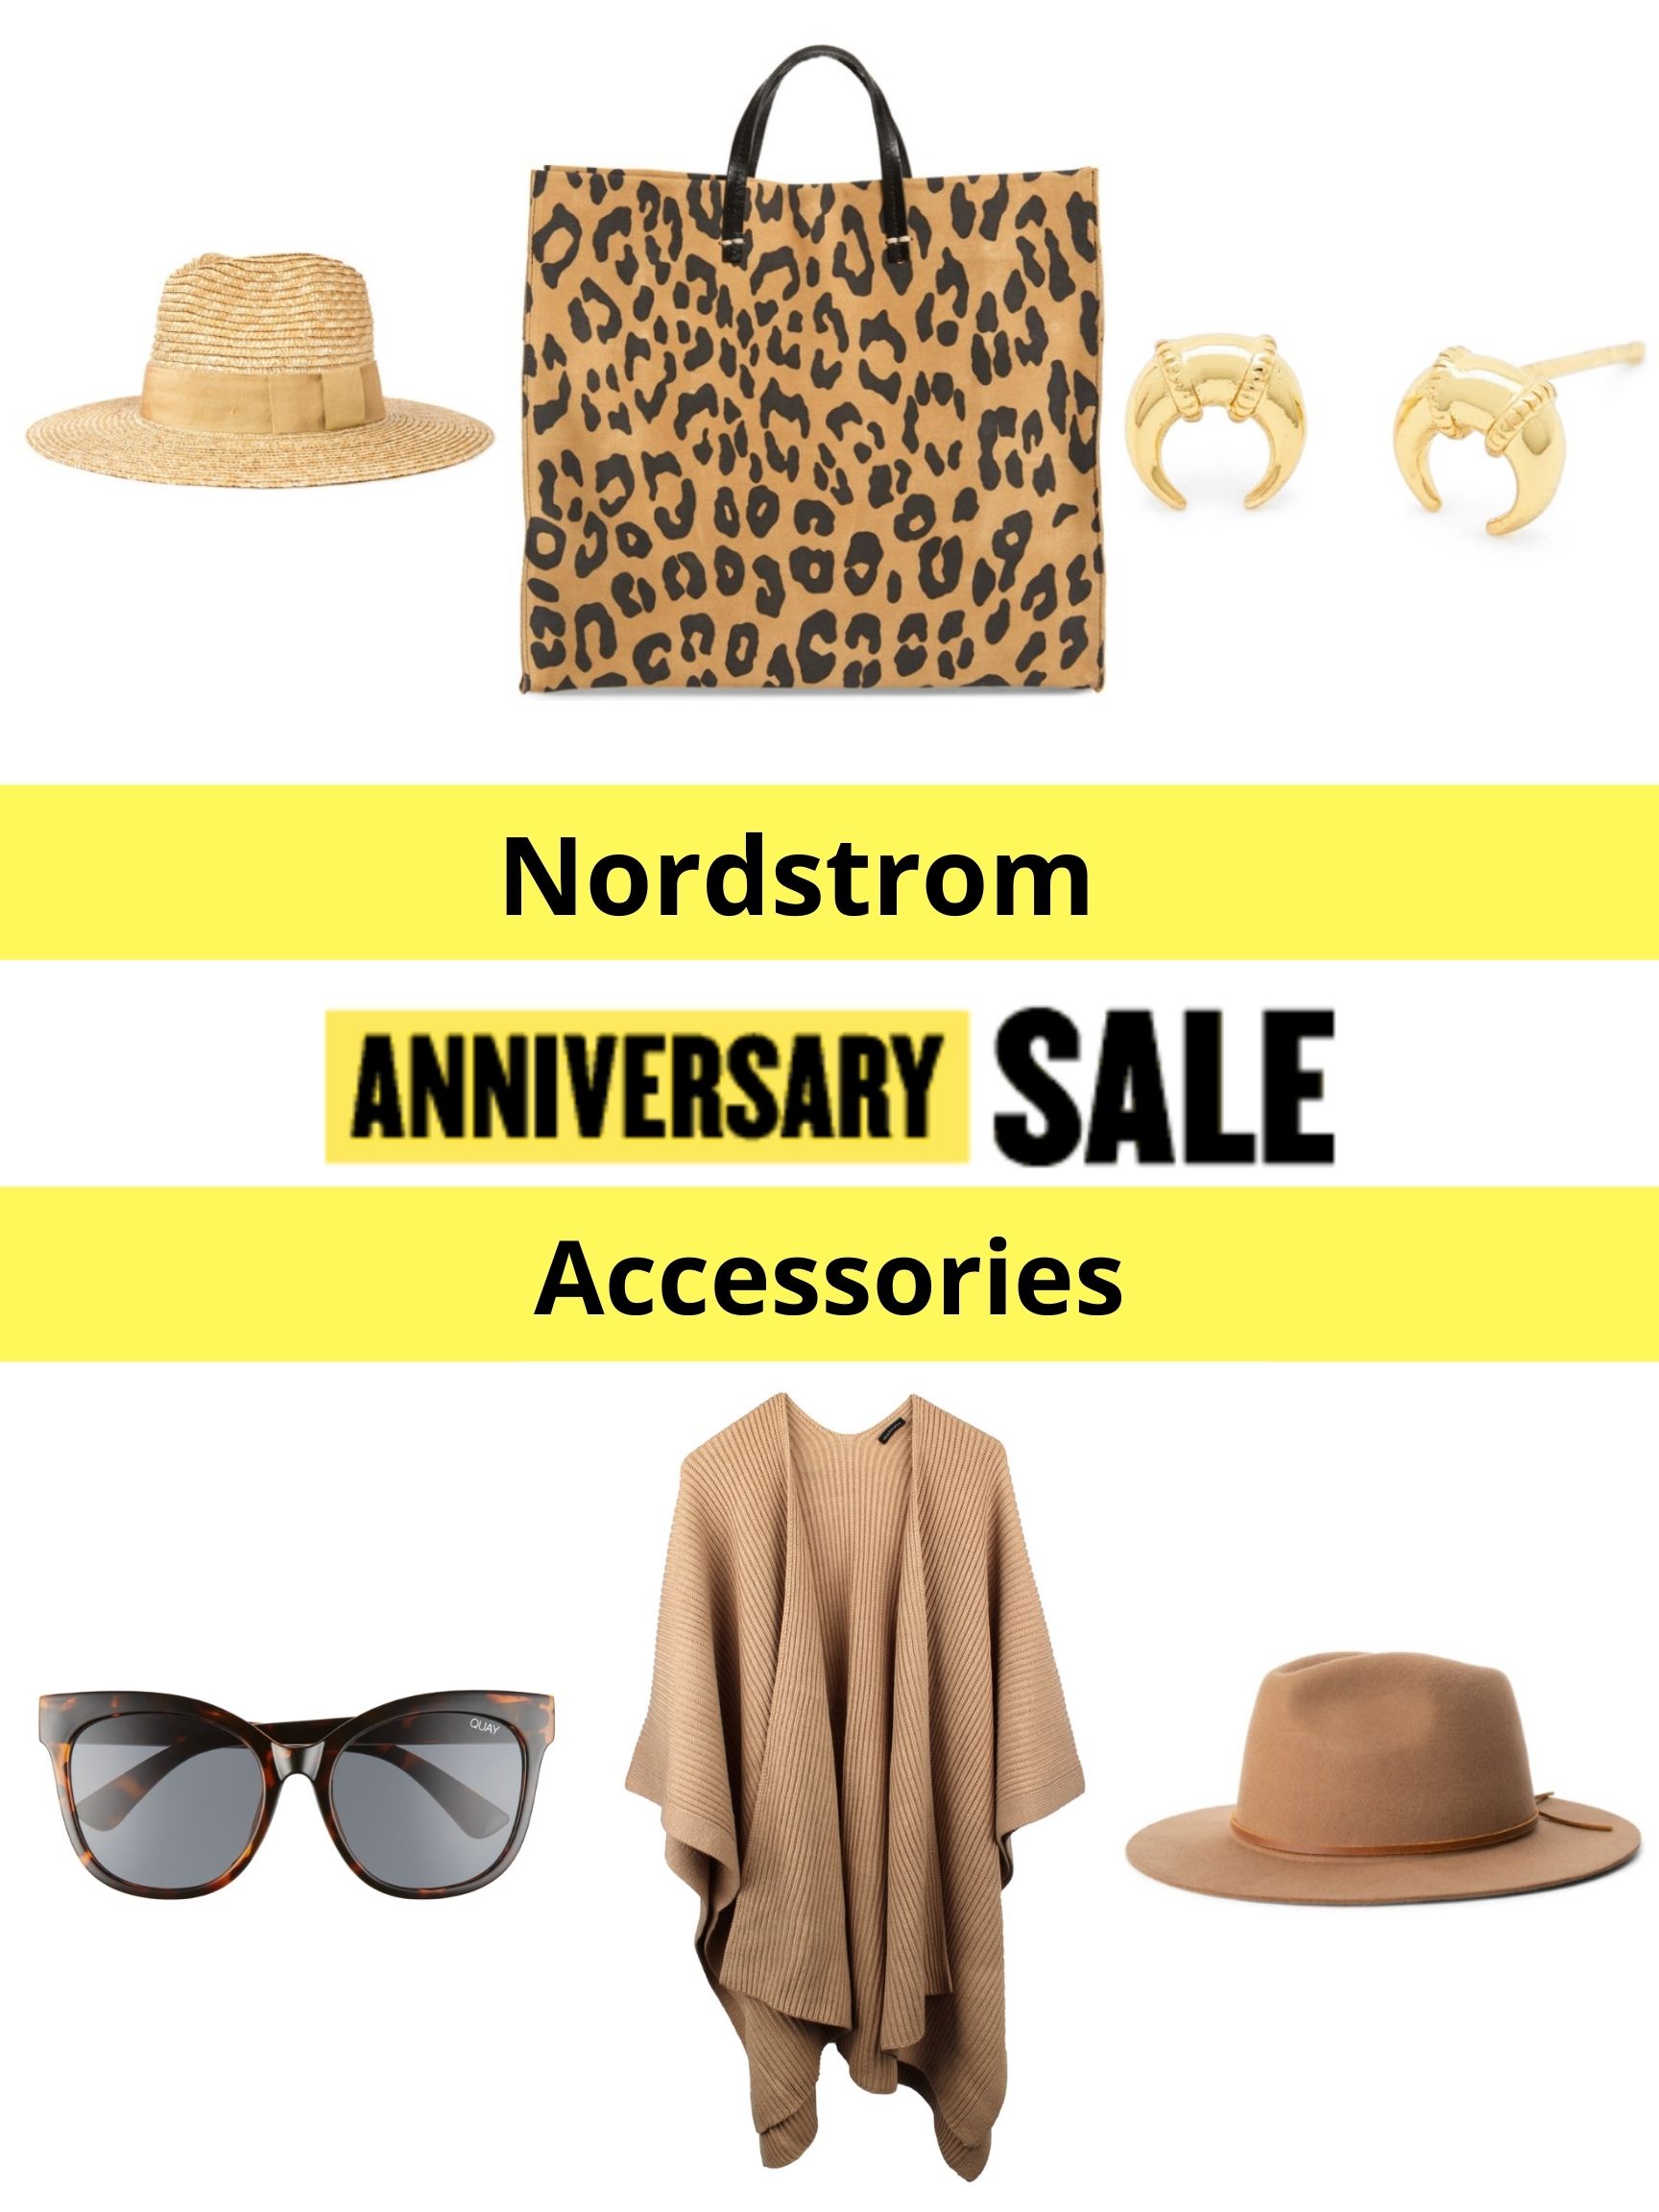 The 2020 Nordstrom Anniversary Sale is happening and this year the plus size items in the sale are on trend and ready to take you into the fall.